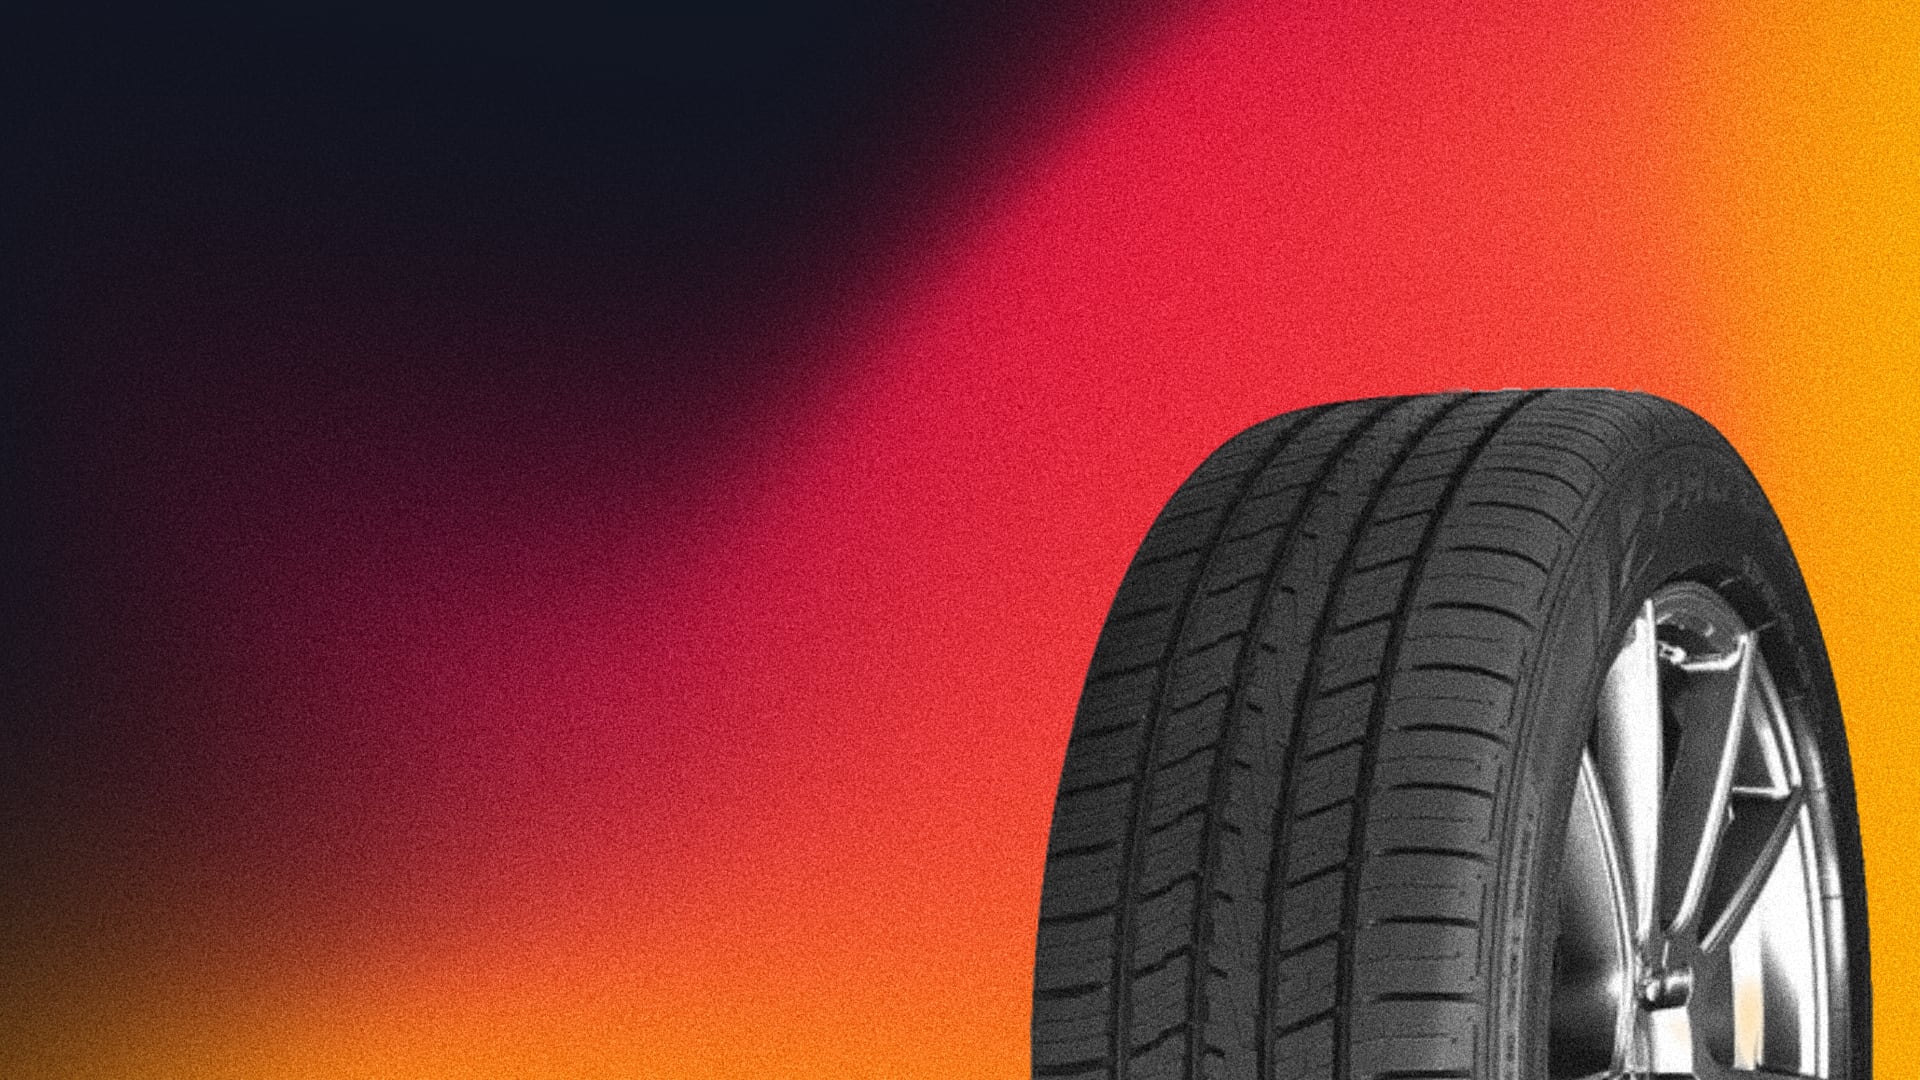 a close up of a tire on a colorful background.